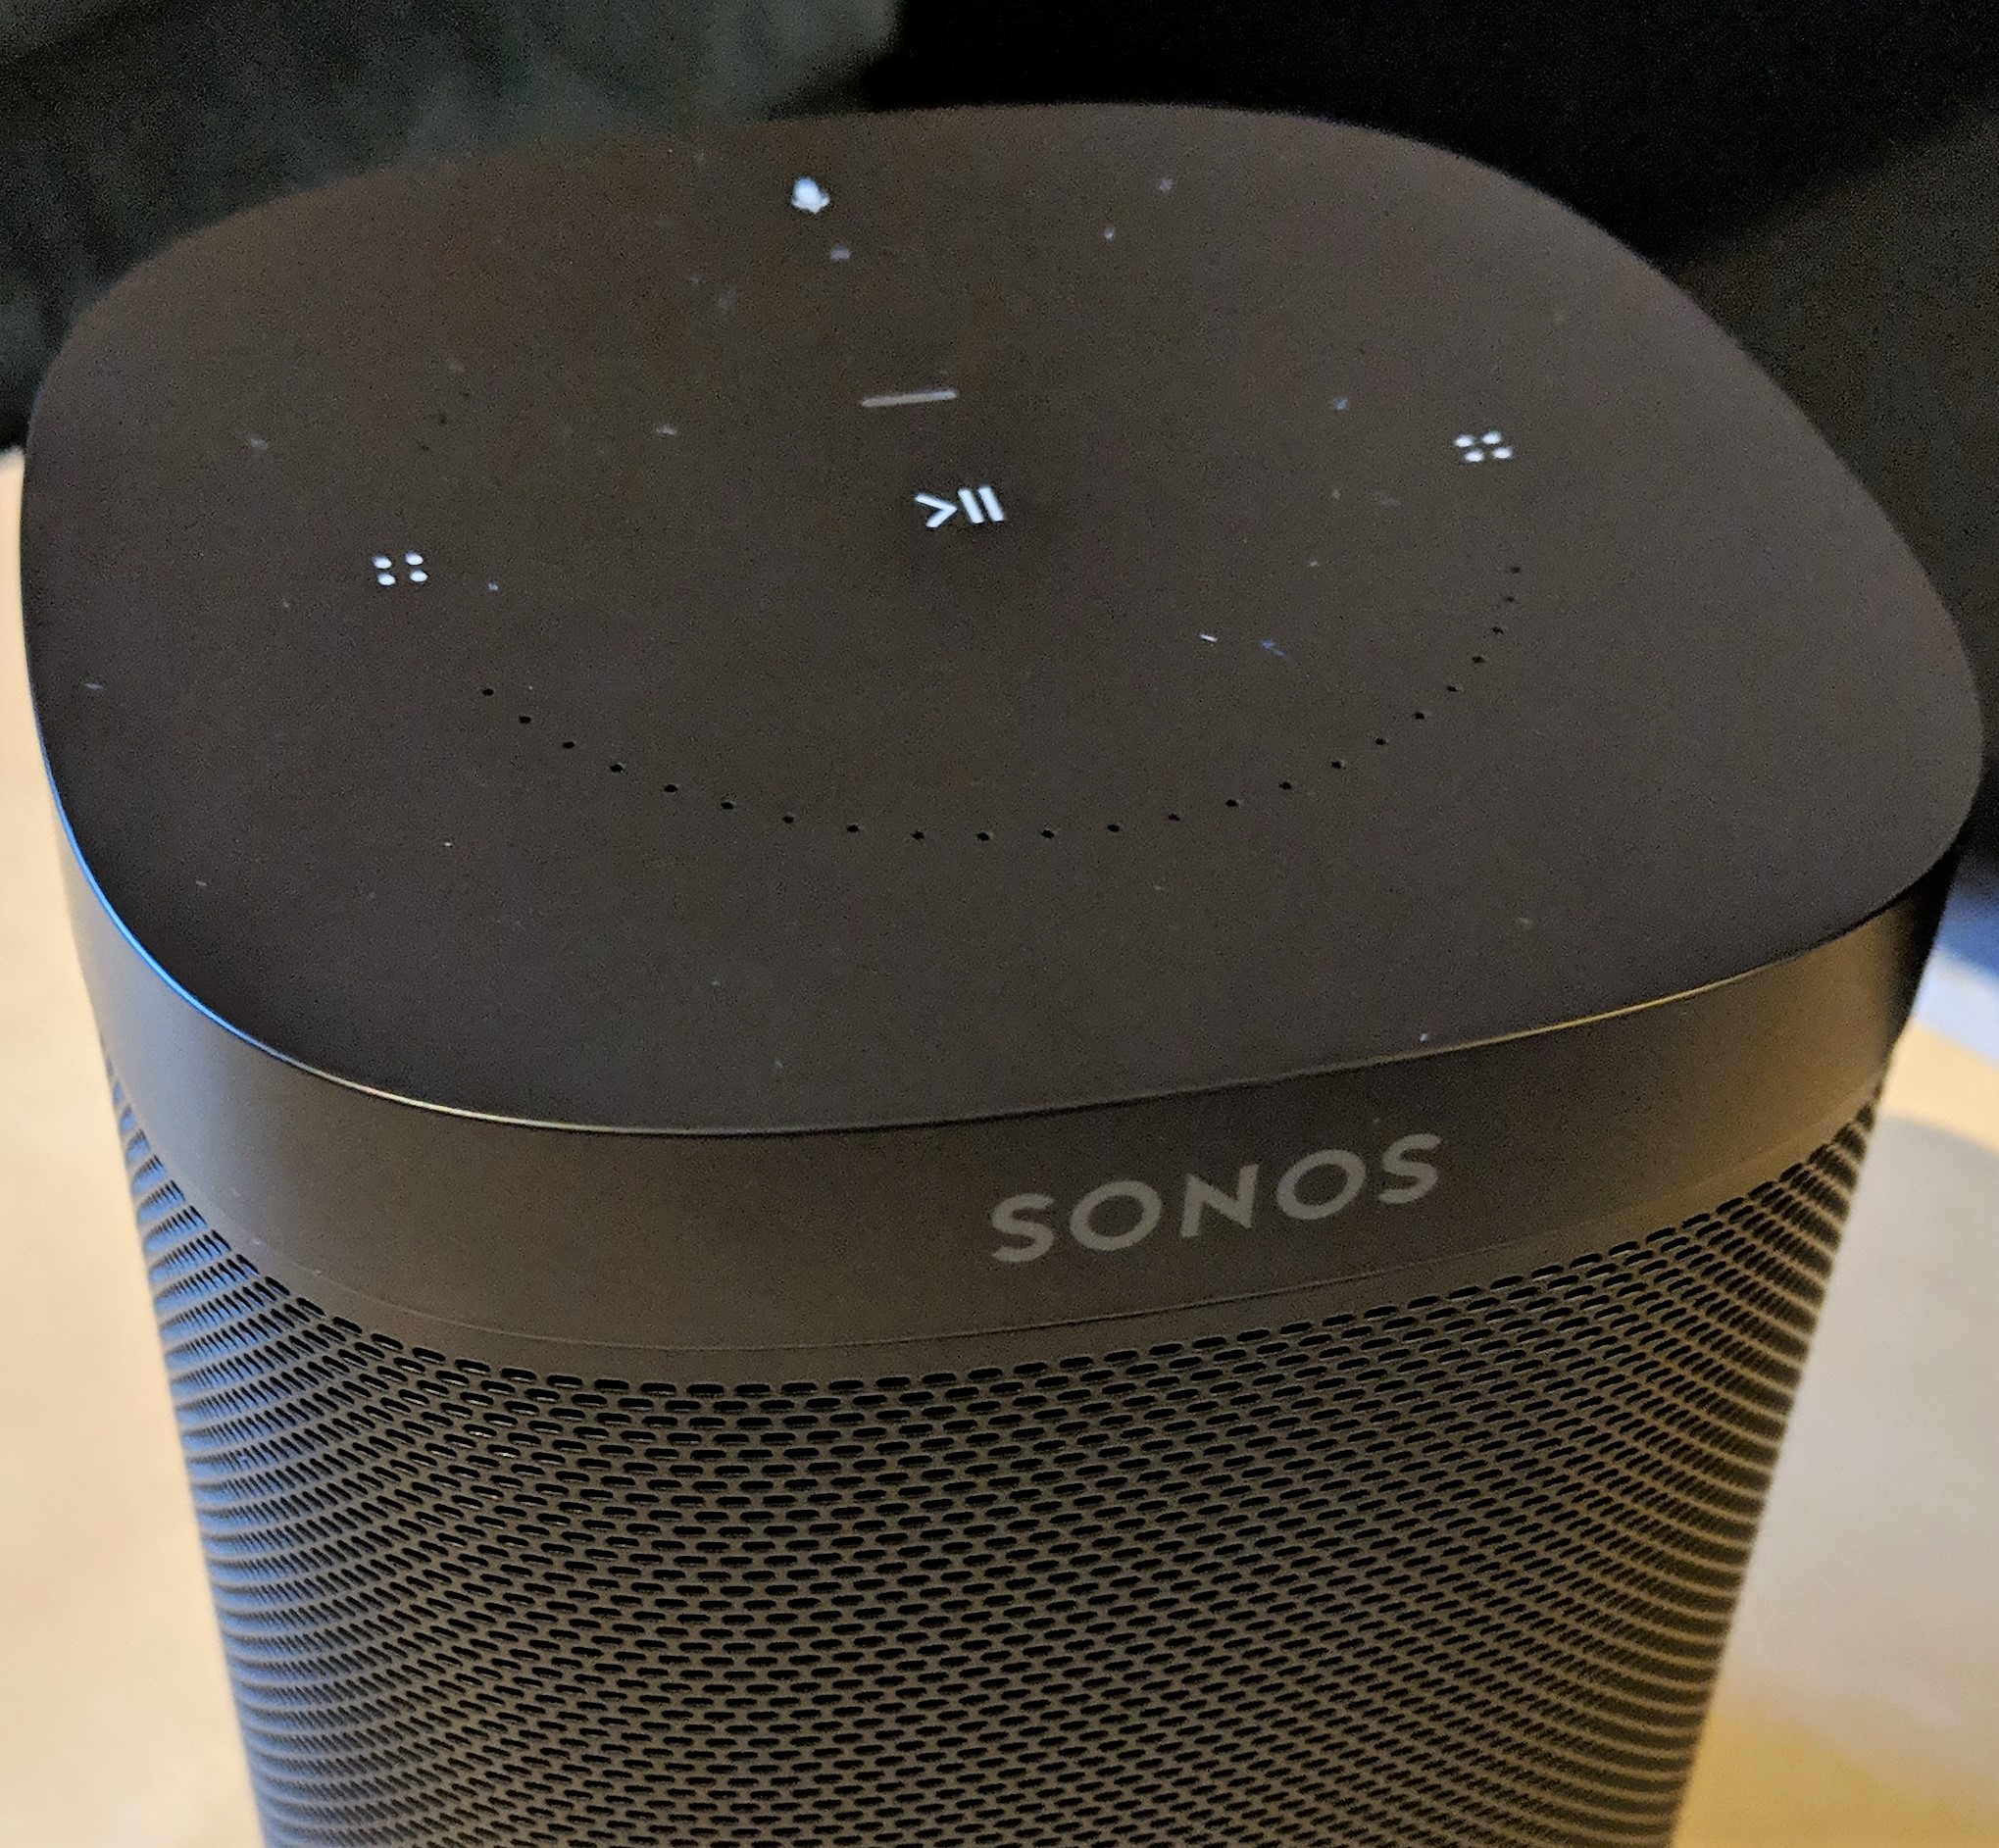 echo dot with sonos one